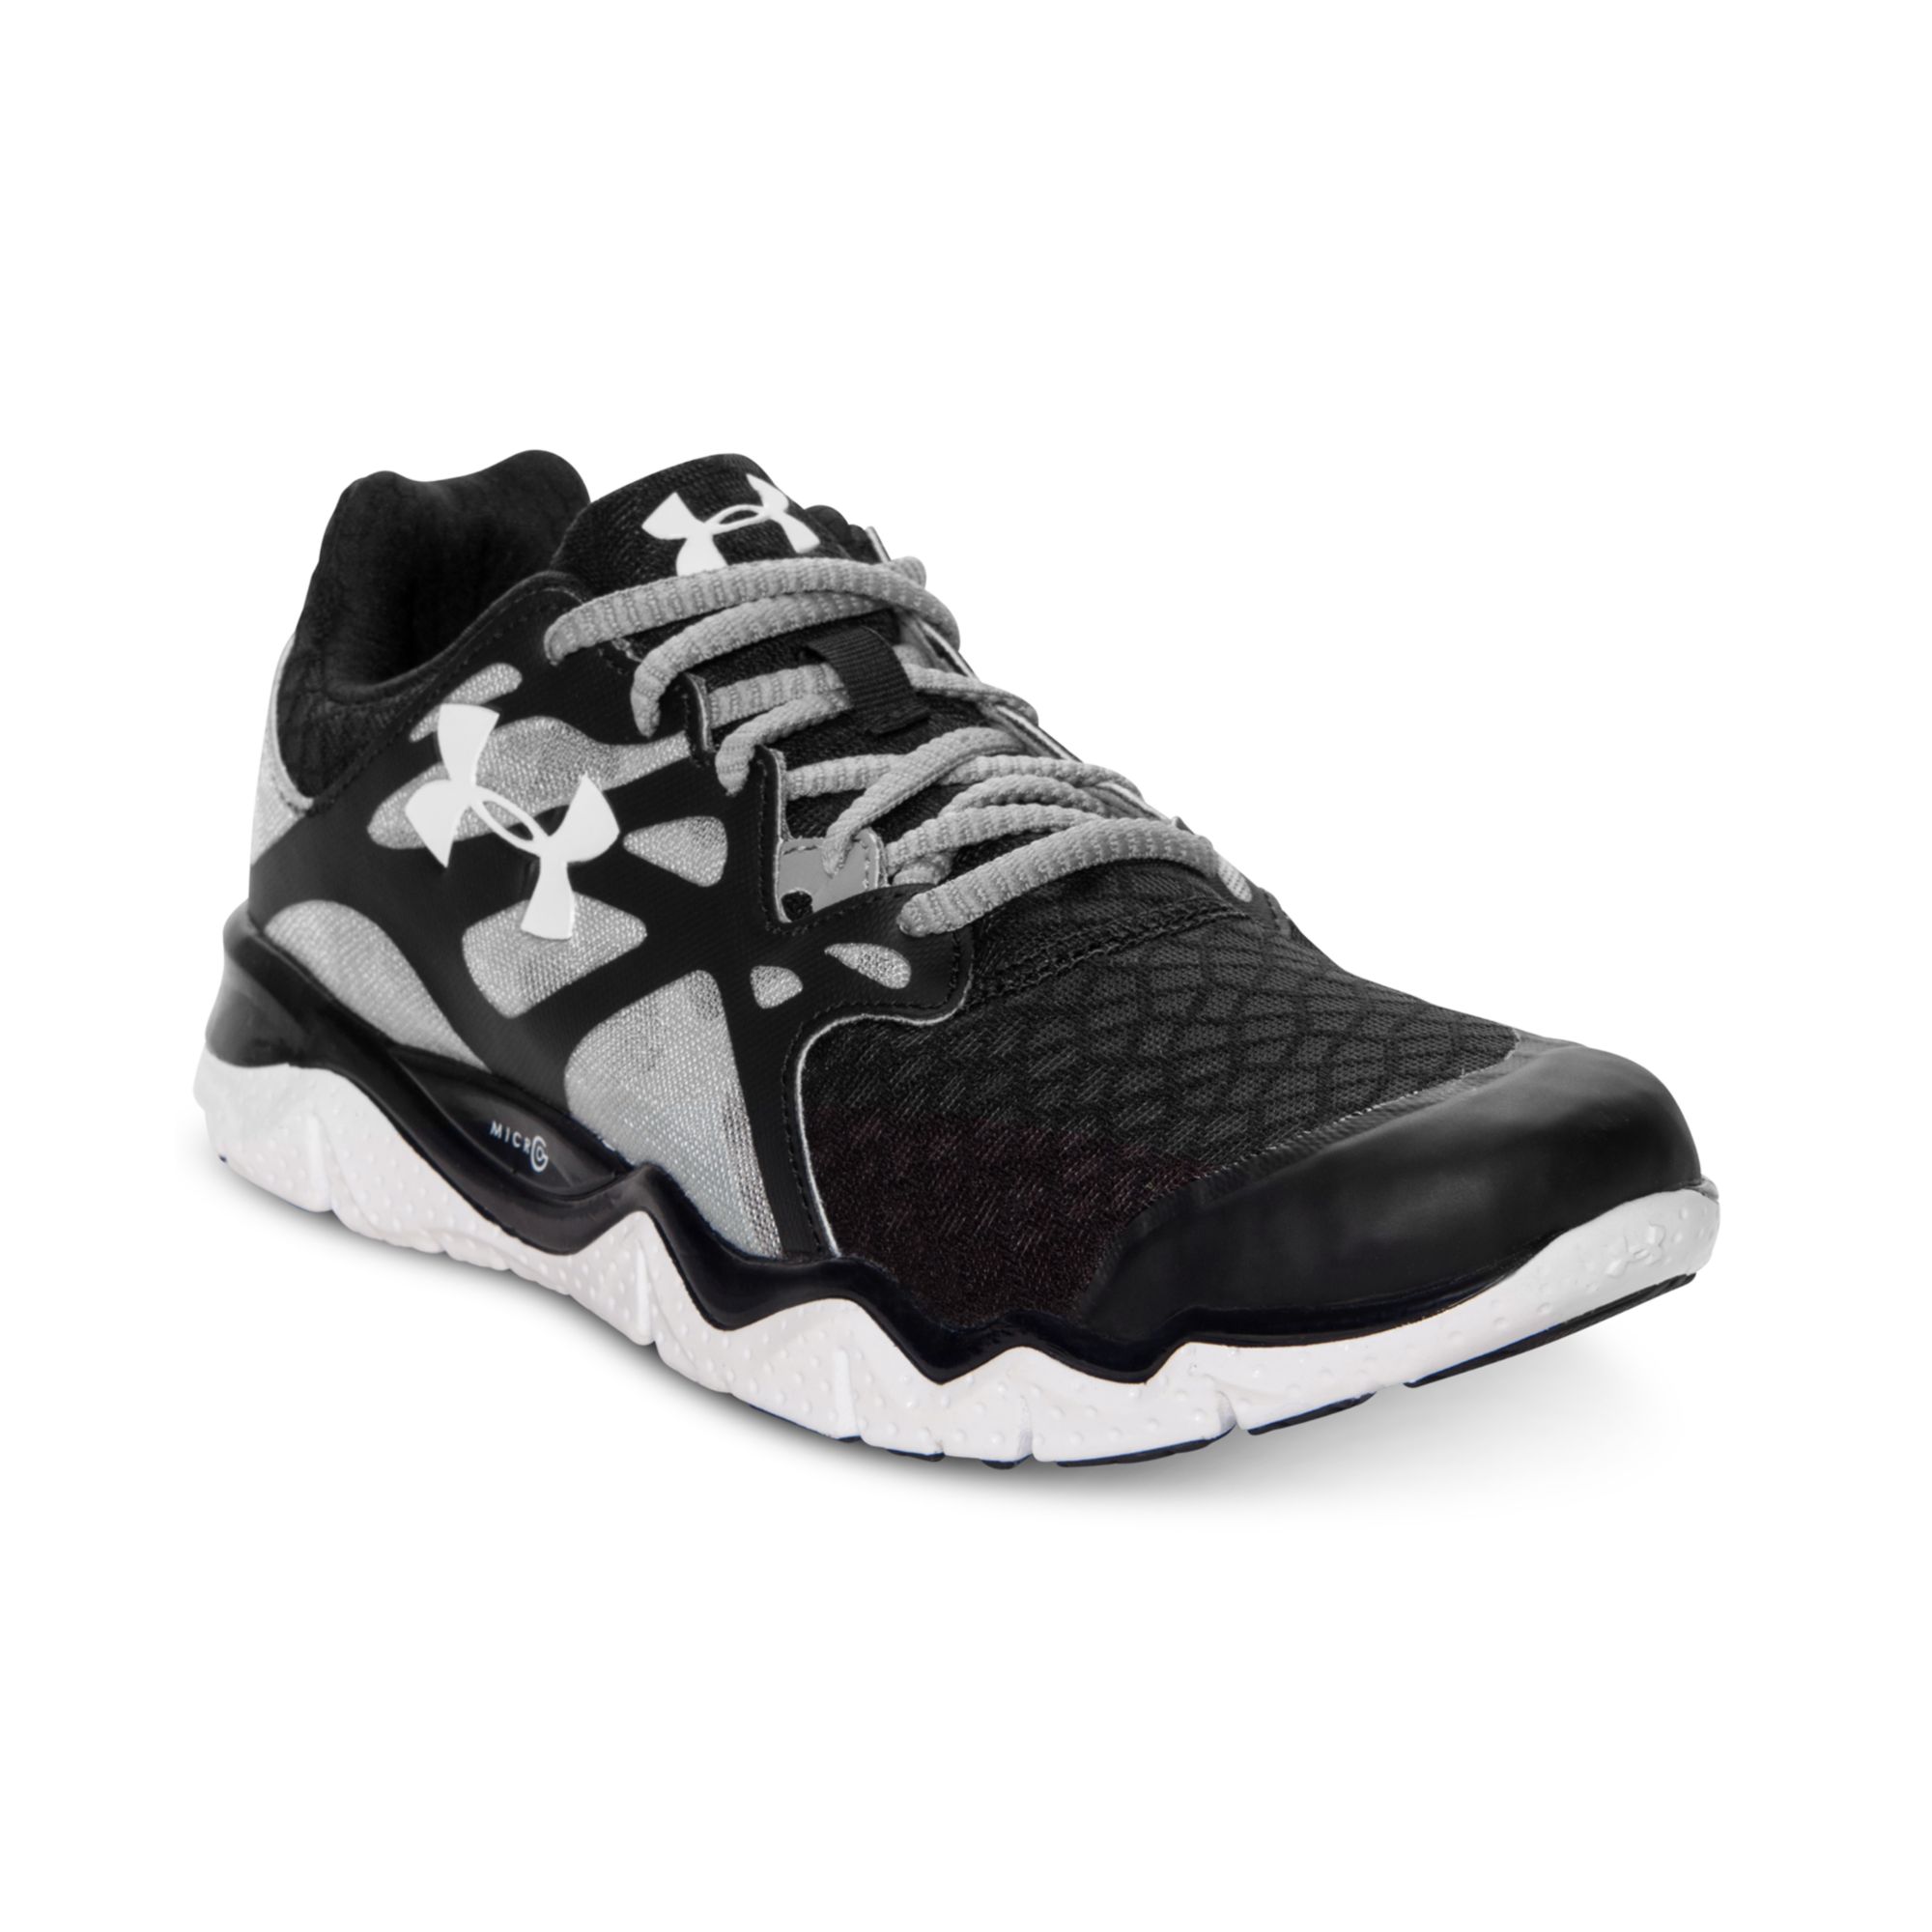 Under Armour Micro G Monza Running Sneakers in Black/White (White) for Men  - Lyst